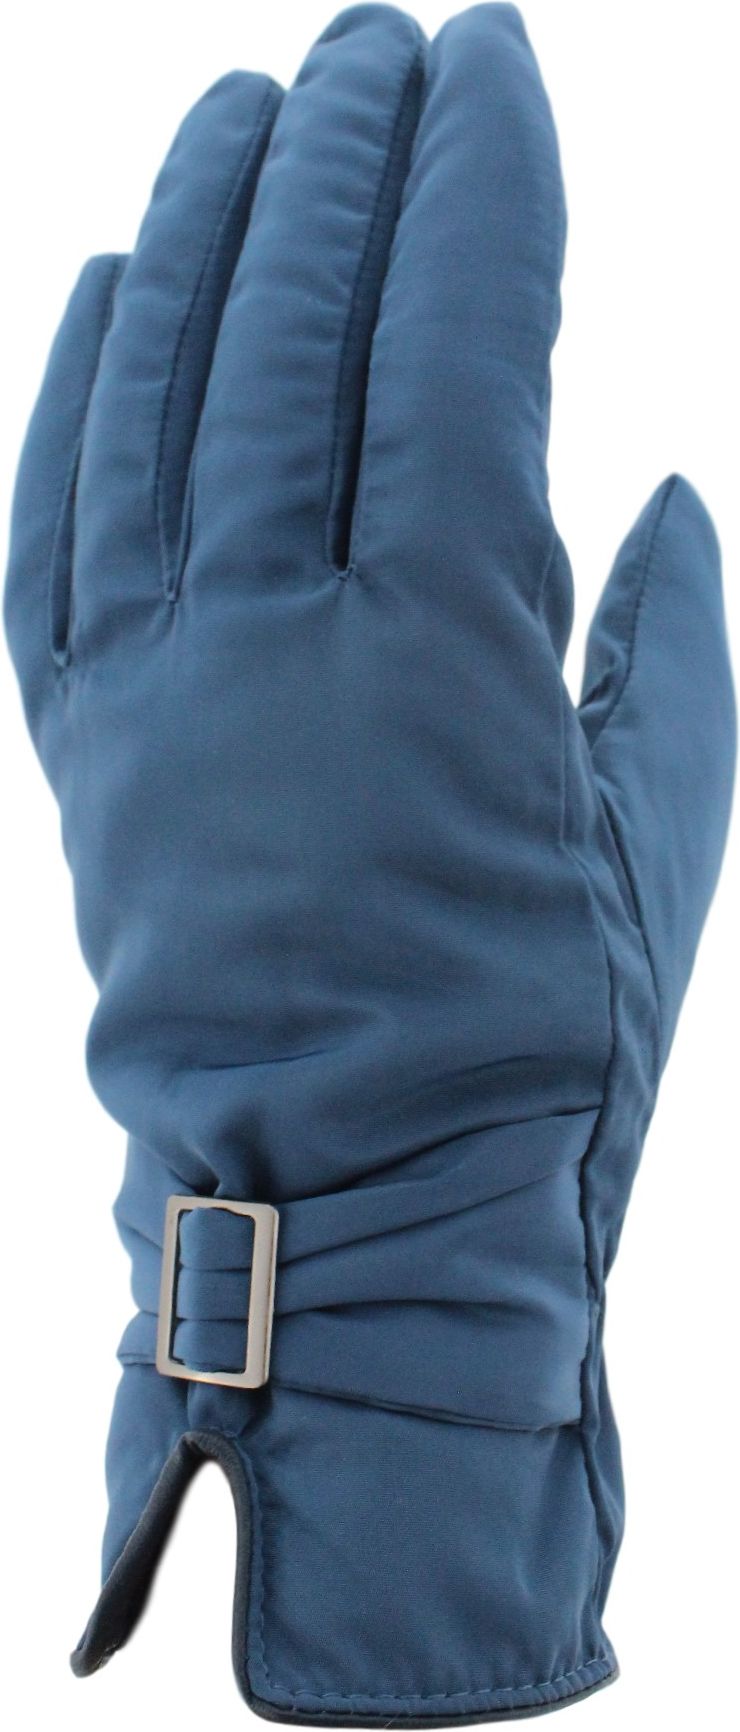 Nylon Glove With Fiberfill And Buckle